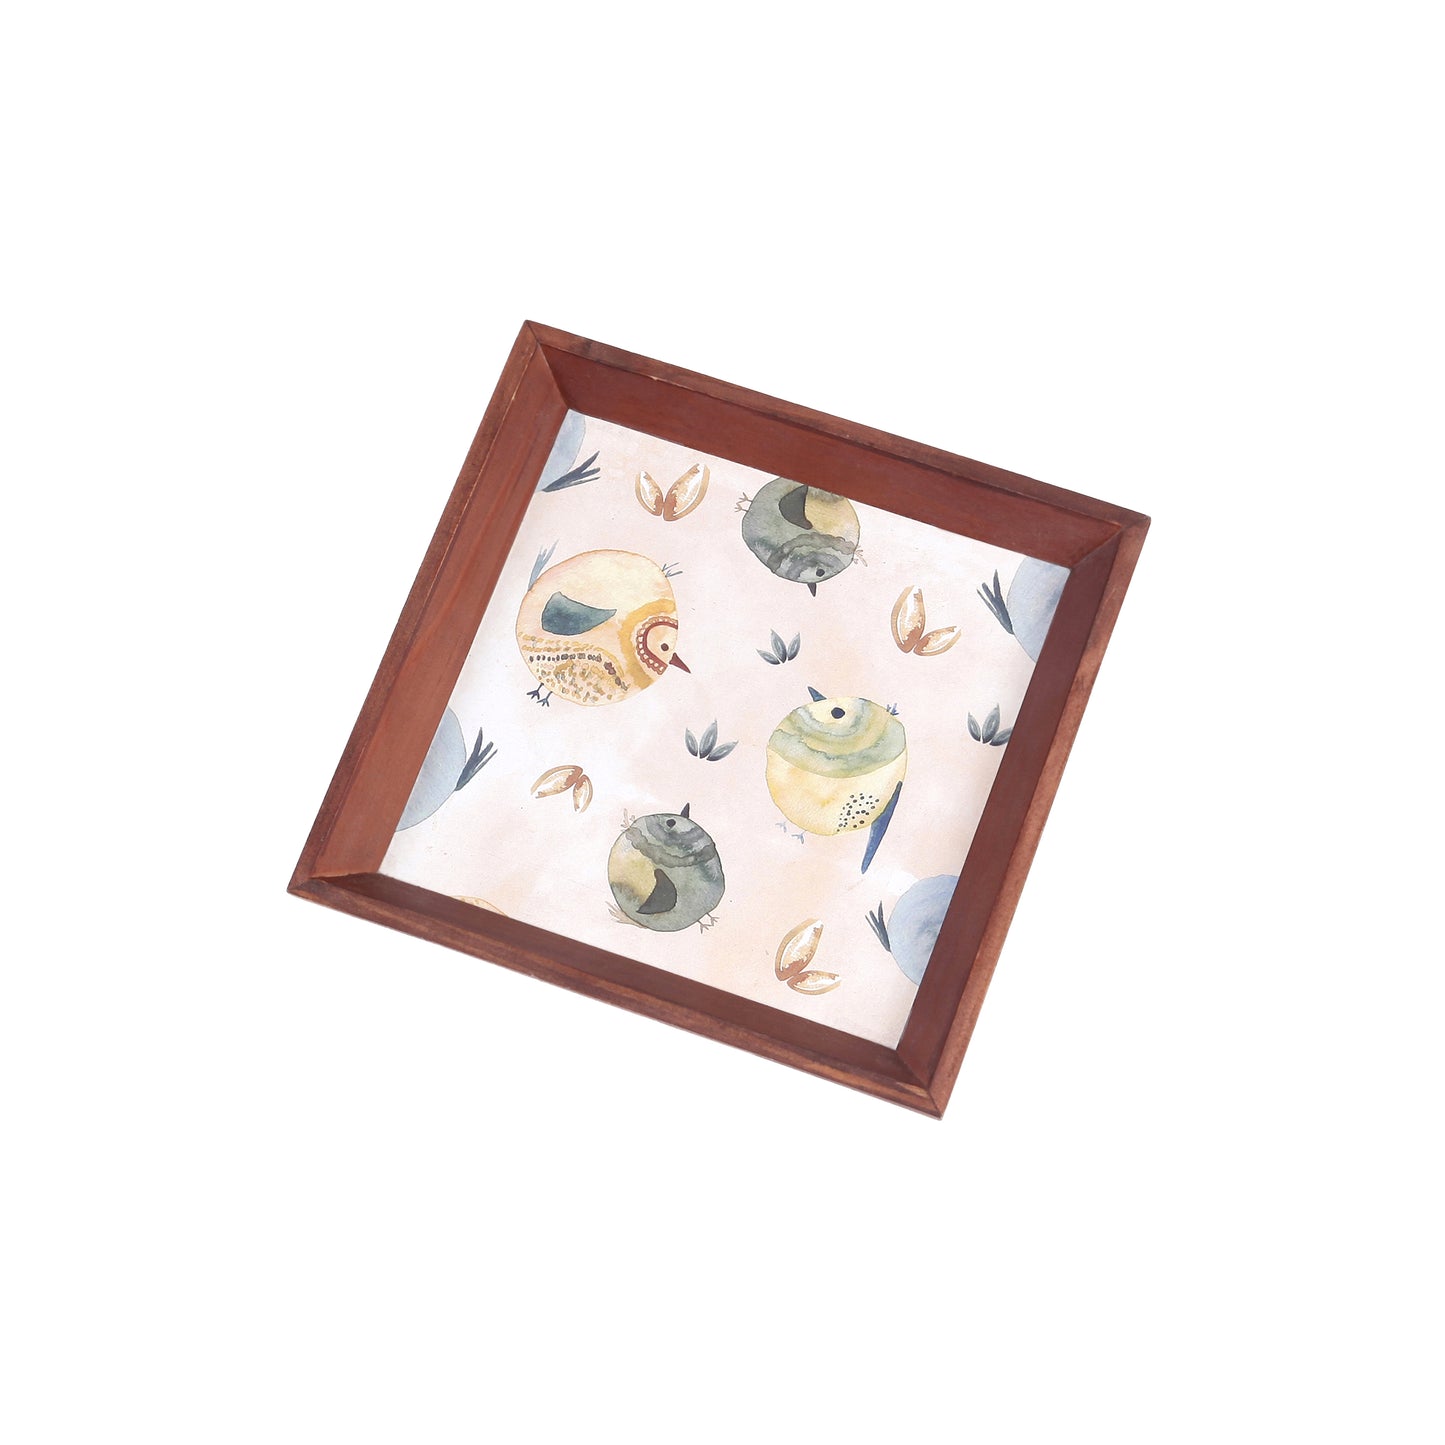 A Tiny Mistake Cute Birds Small Square Wooden Serving Tray, 18 x 18 x 2 cm